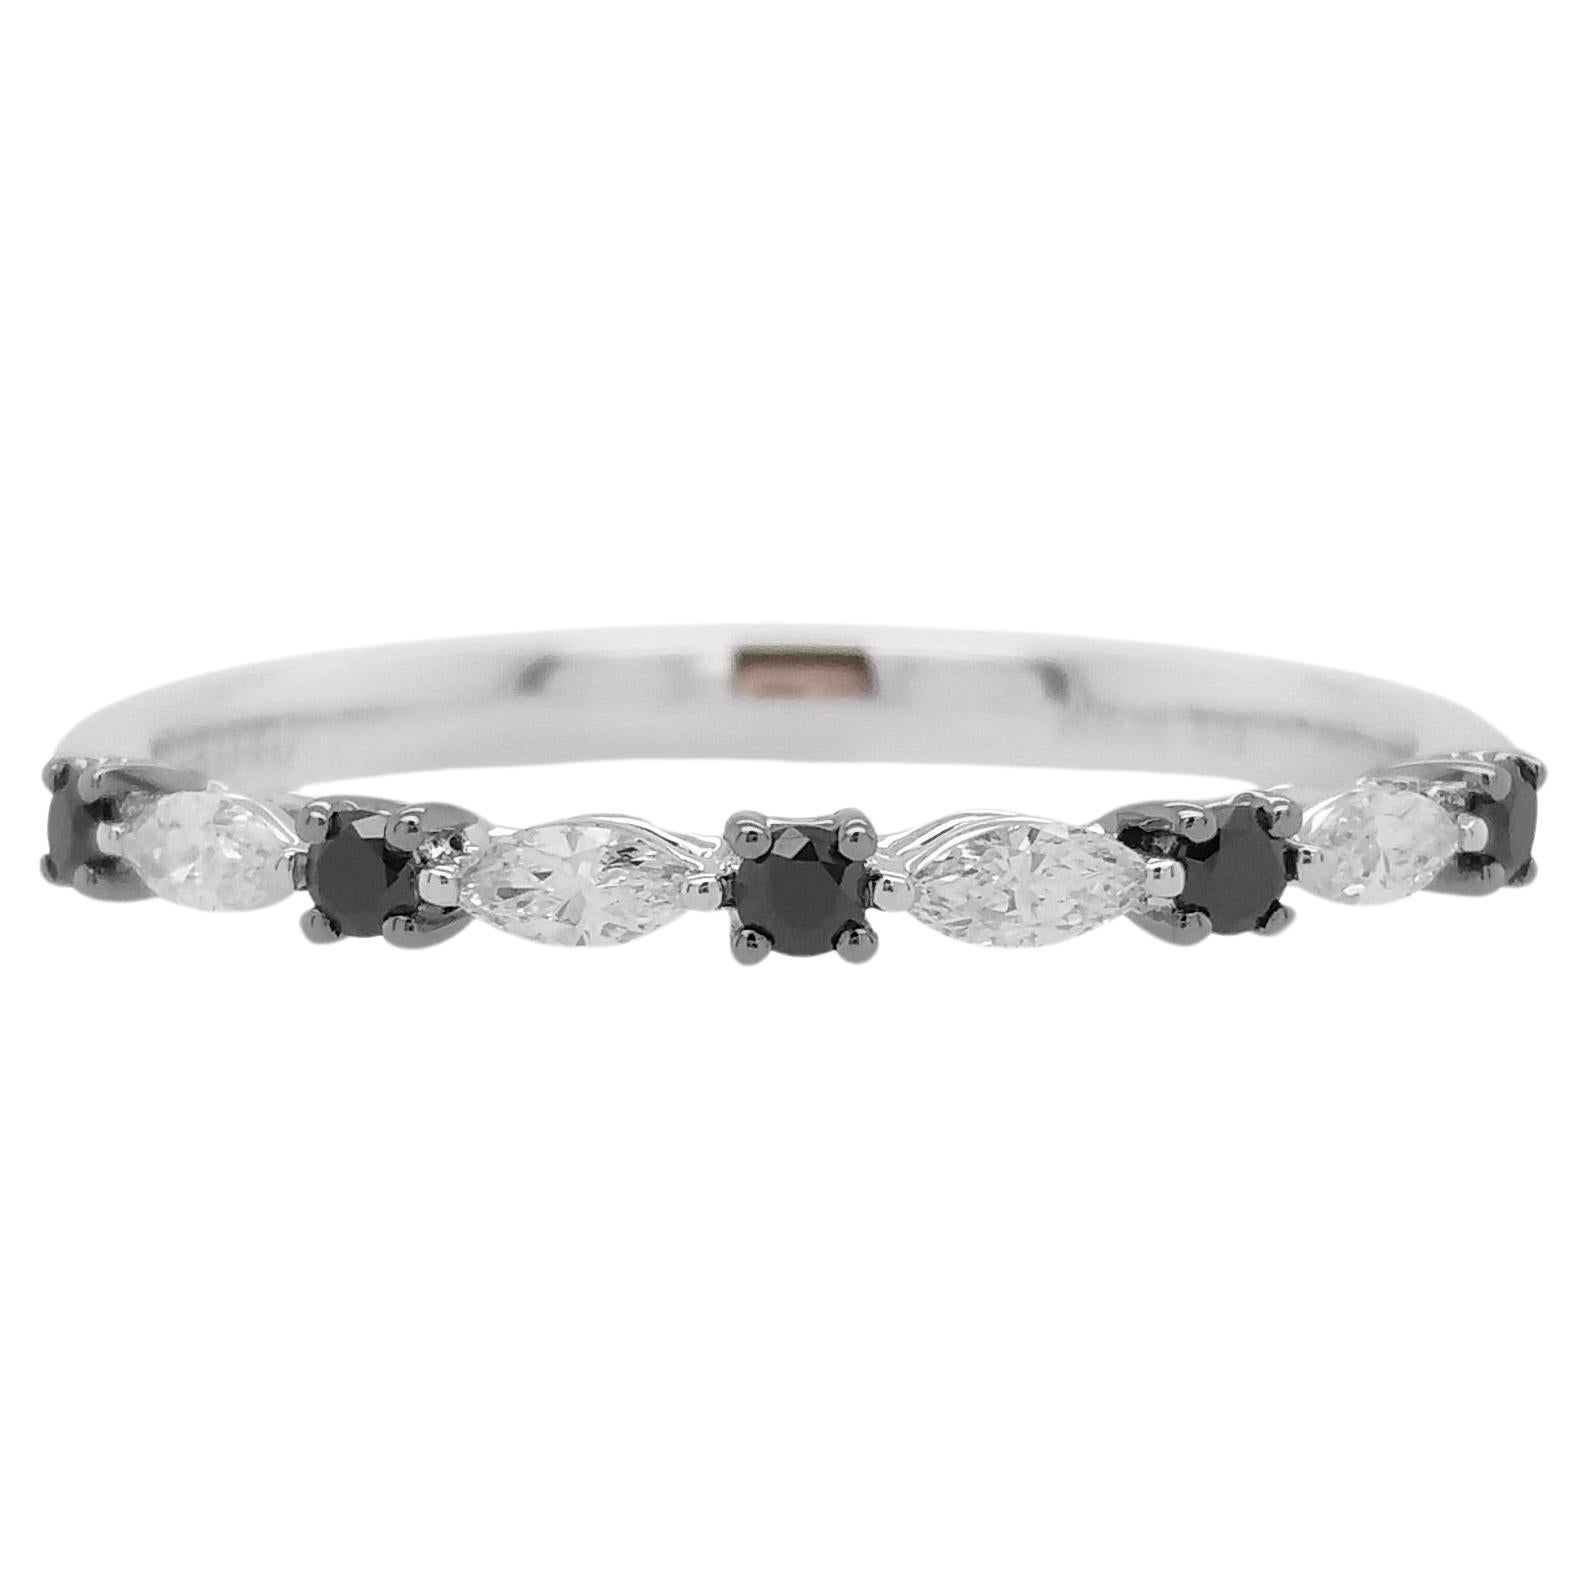 Black Diamond and White Marquise Diamond Band Ring made in 18K Gold